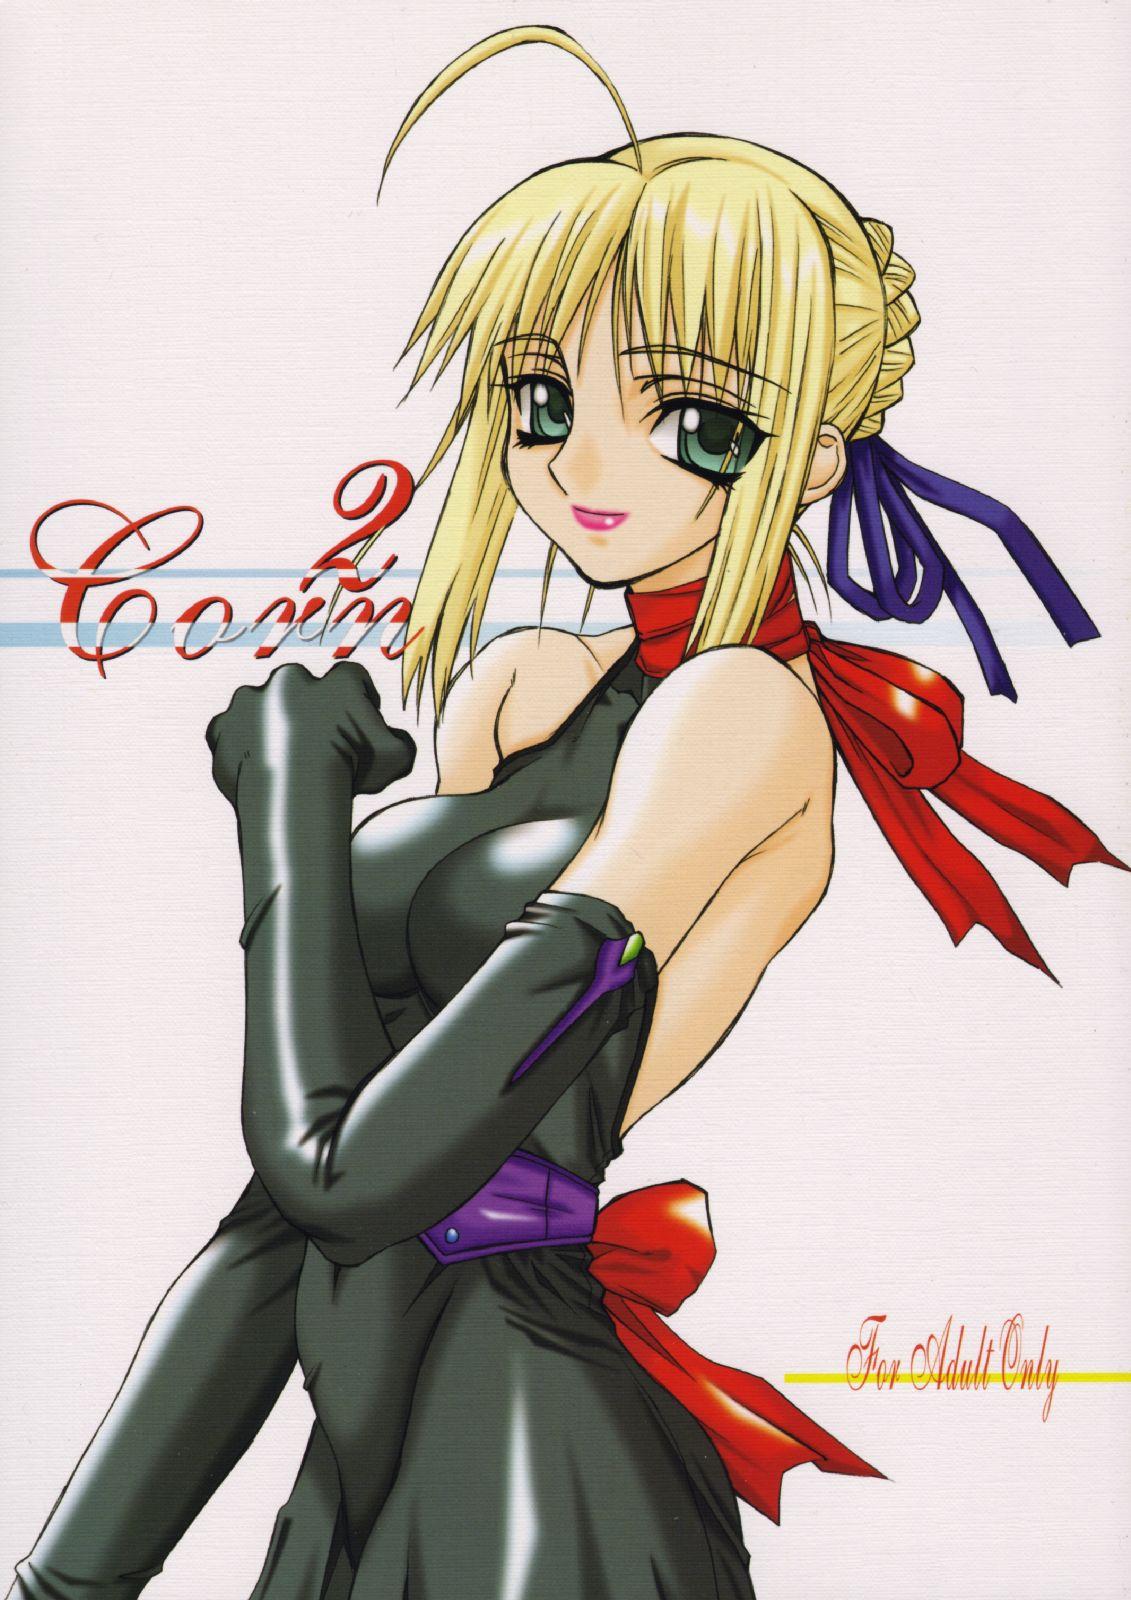 Pay Corn 2 - Fate stay night Costume - Picture 1